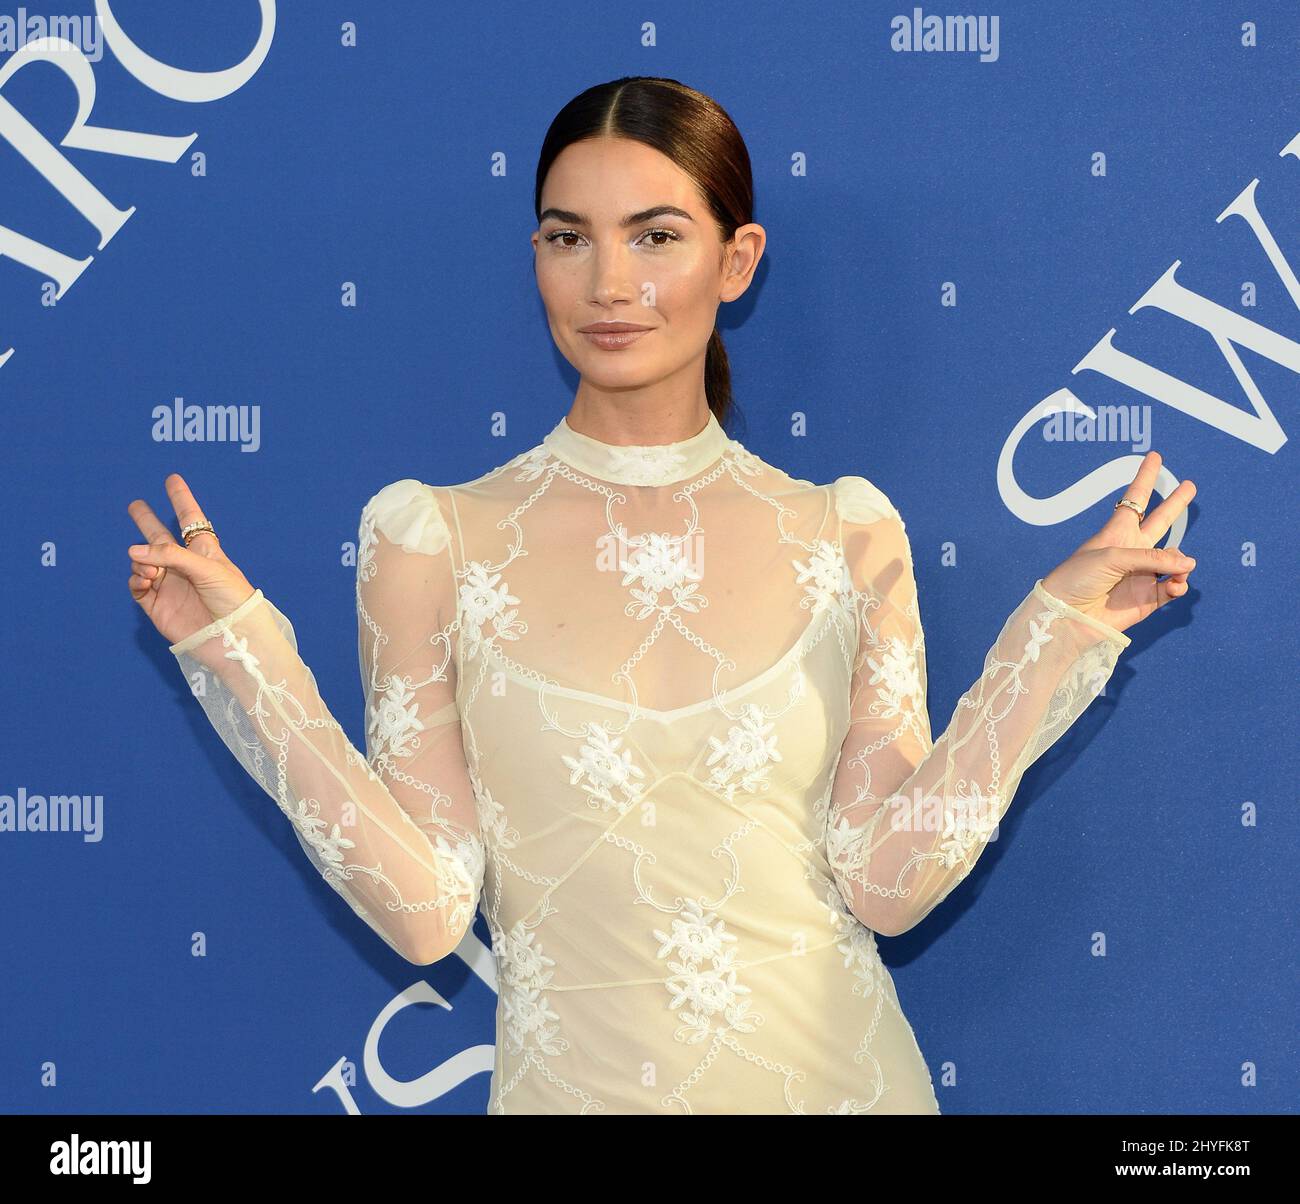 Lily Aldridge at the 2018 CFDA Fashion Awards held at the Brooklyn Museum on June 4, 2018 in Brooklyn, NY Stock Photo